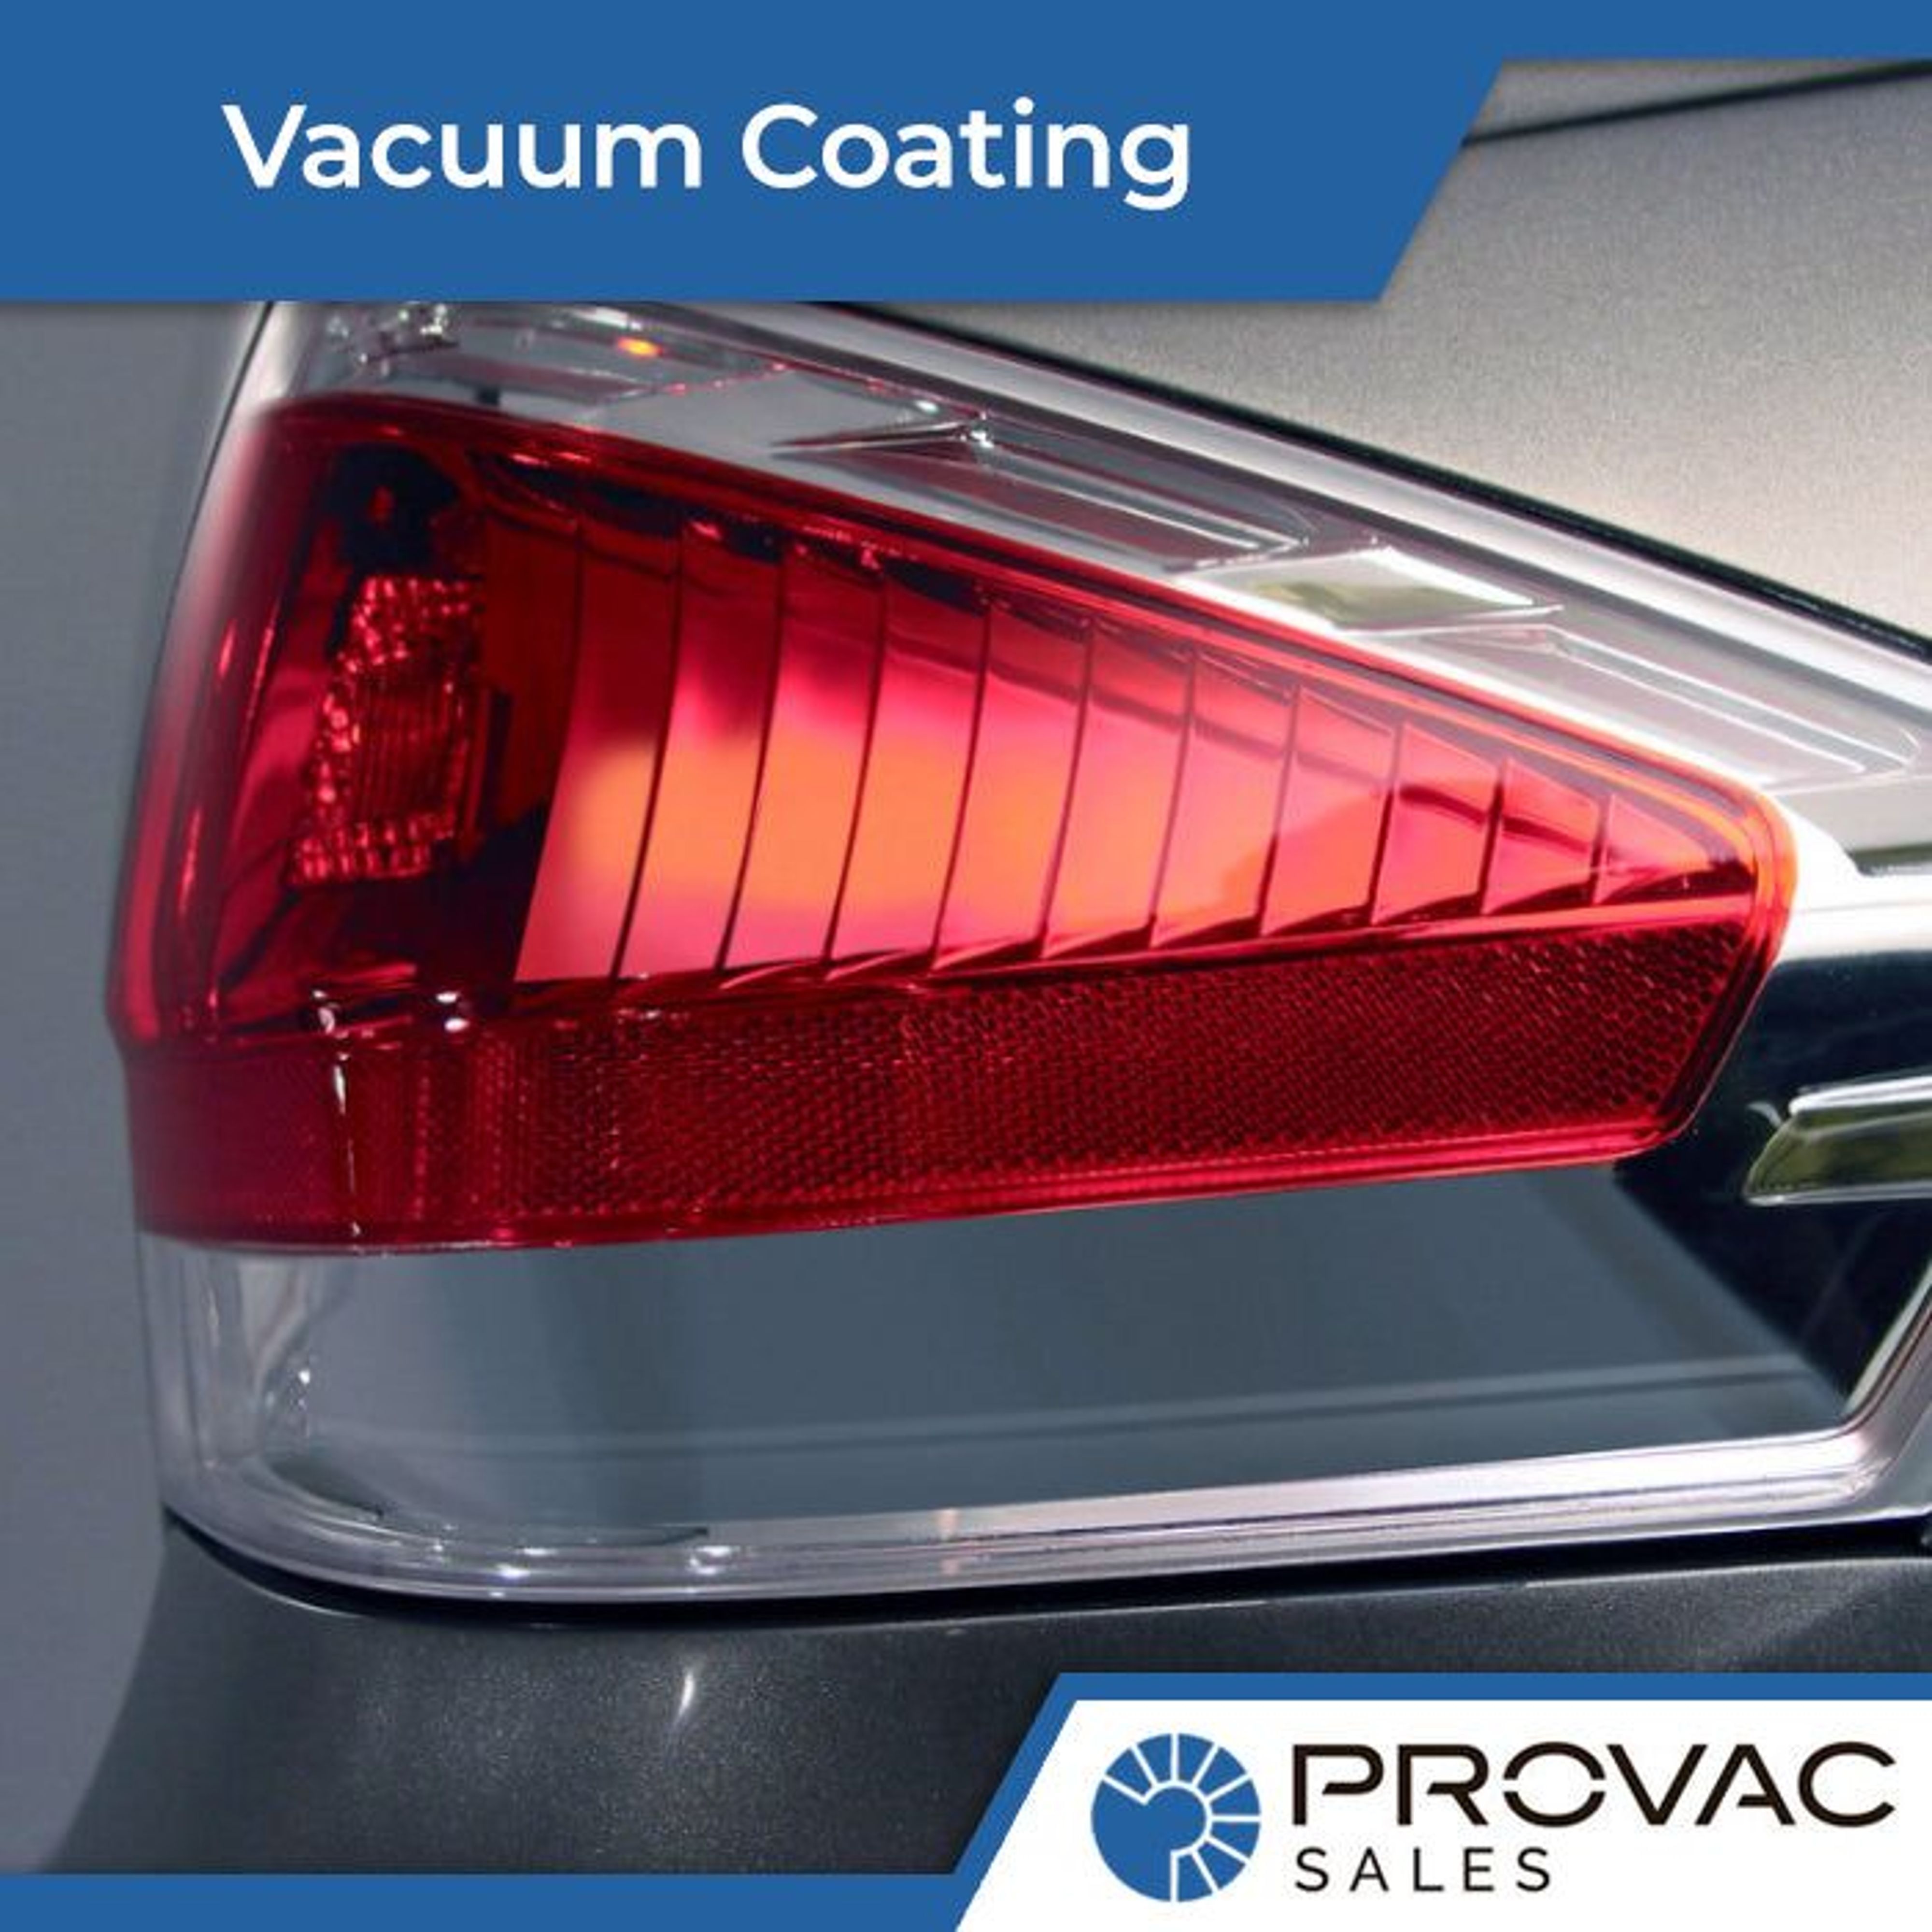 Vacuum Coating Applications for Automobiles Background